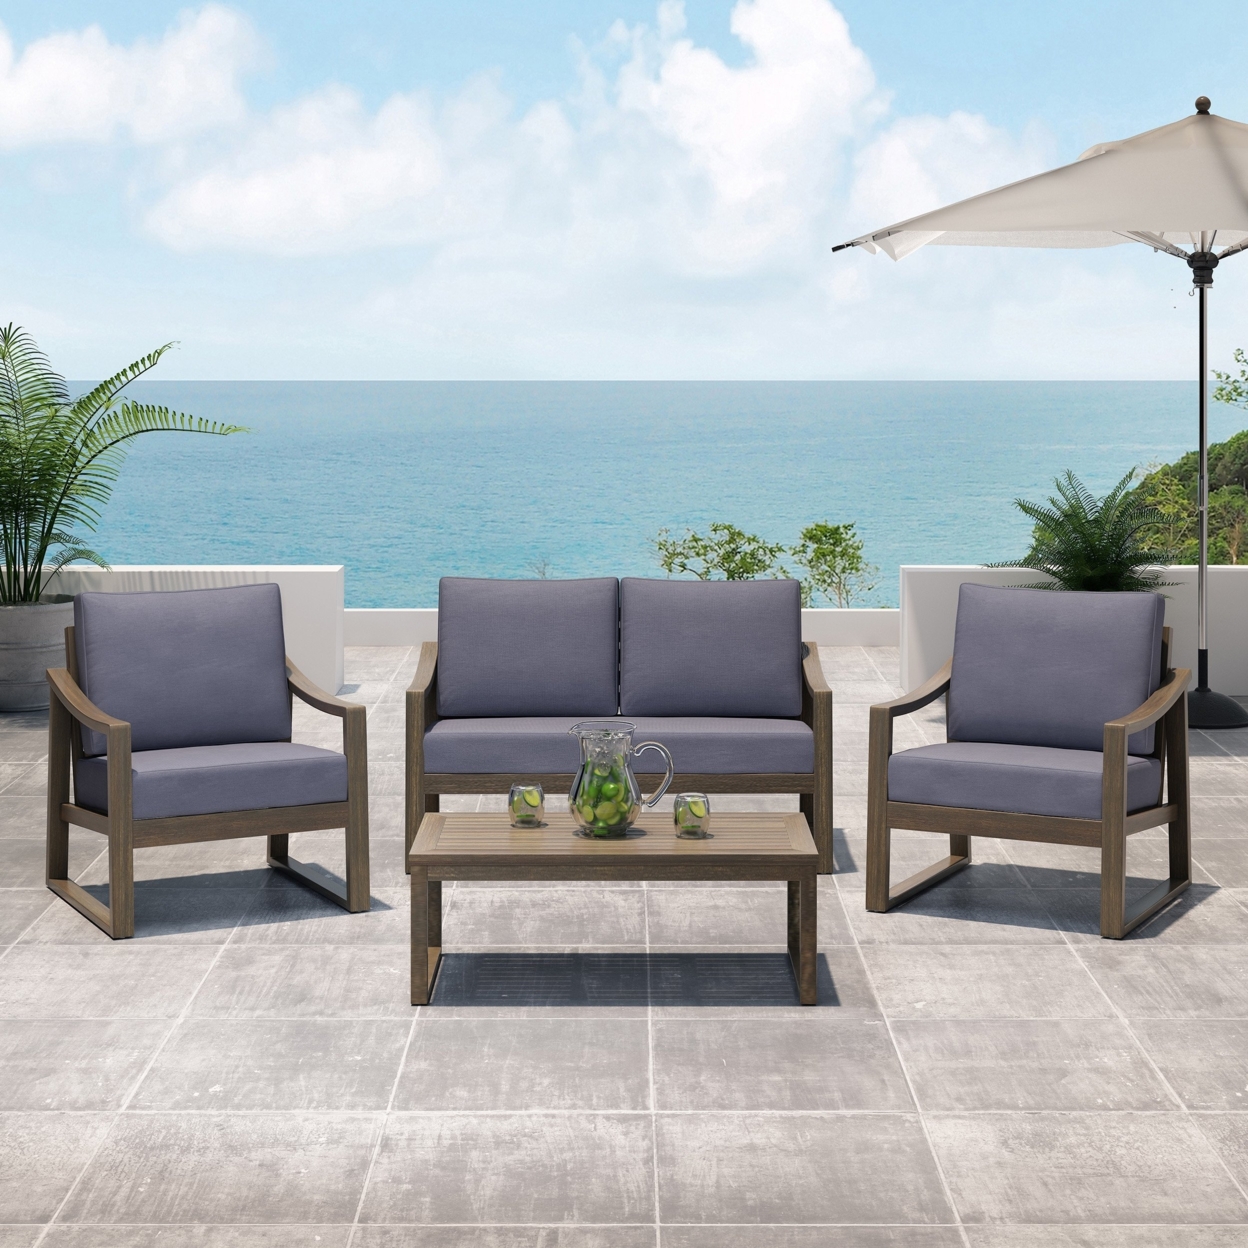 Johnlucas Outdoor 4 Seater Acacia Wood Chat Set With Water Resistant Cushions - Teak/beige